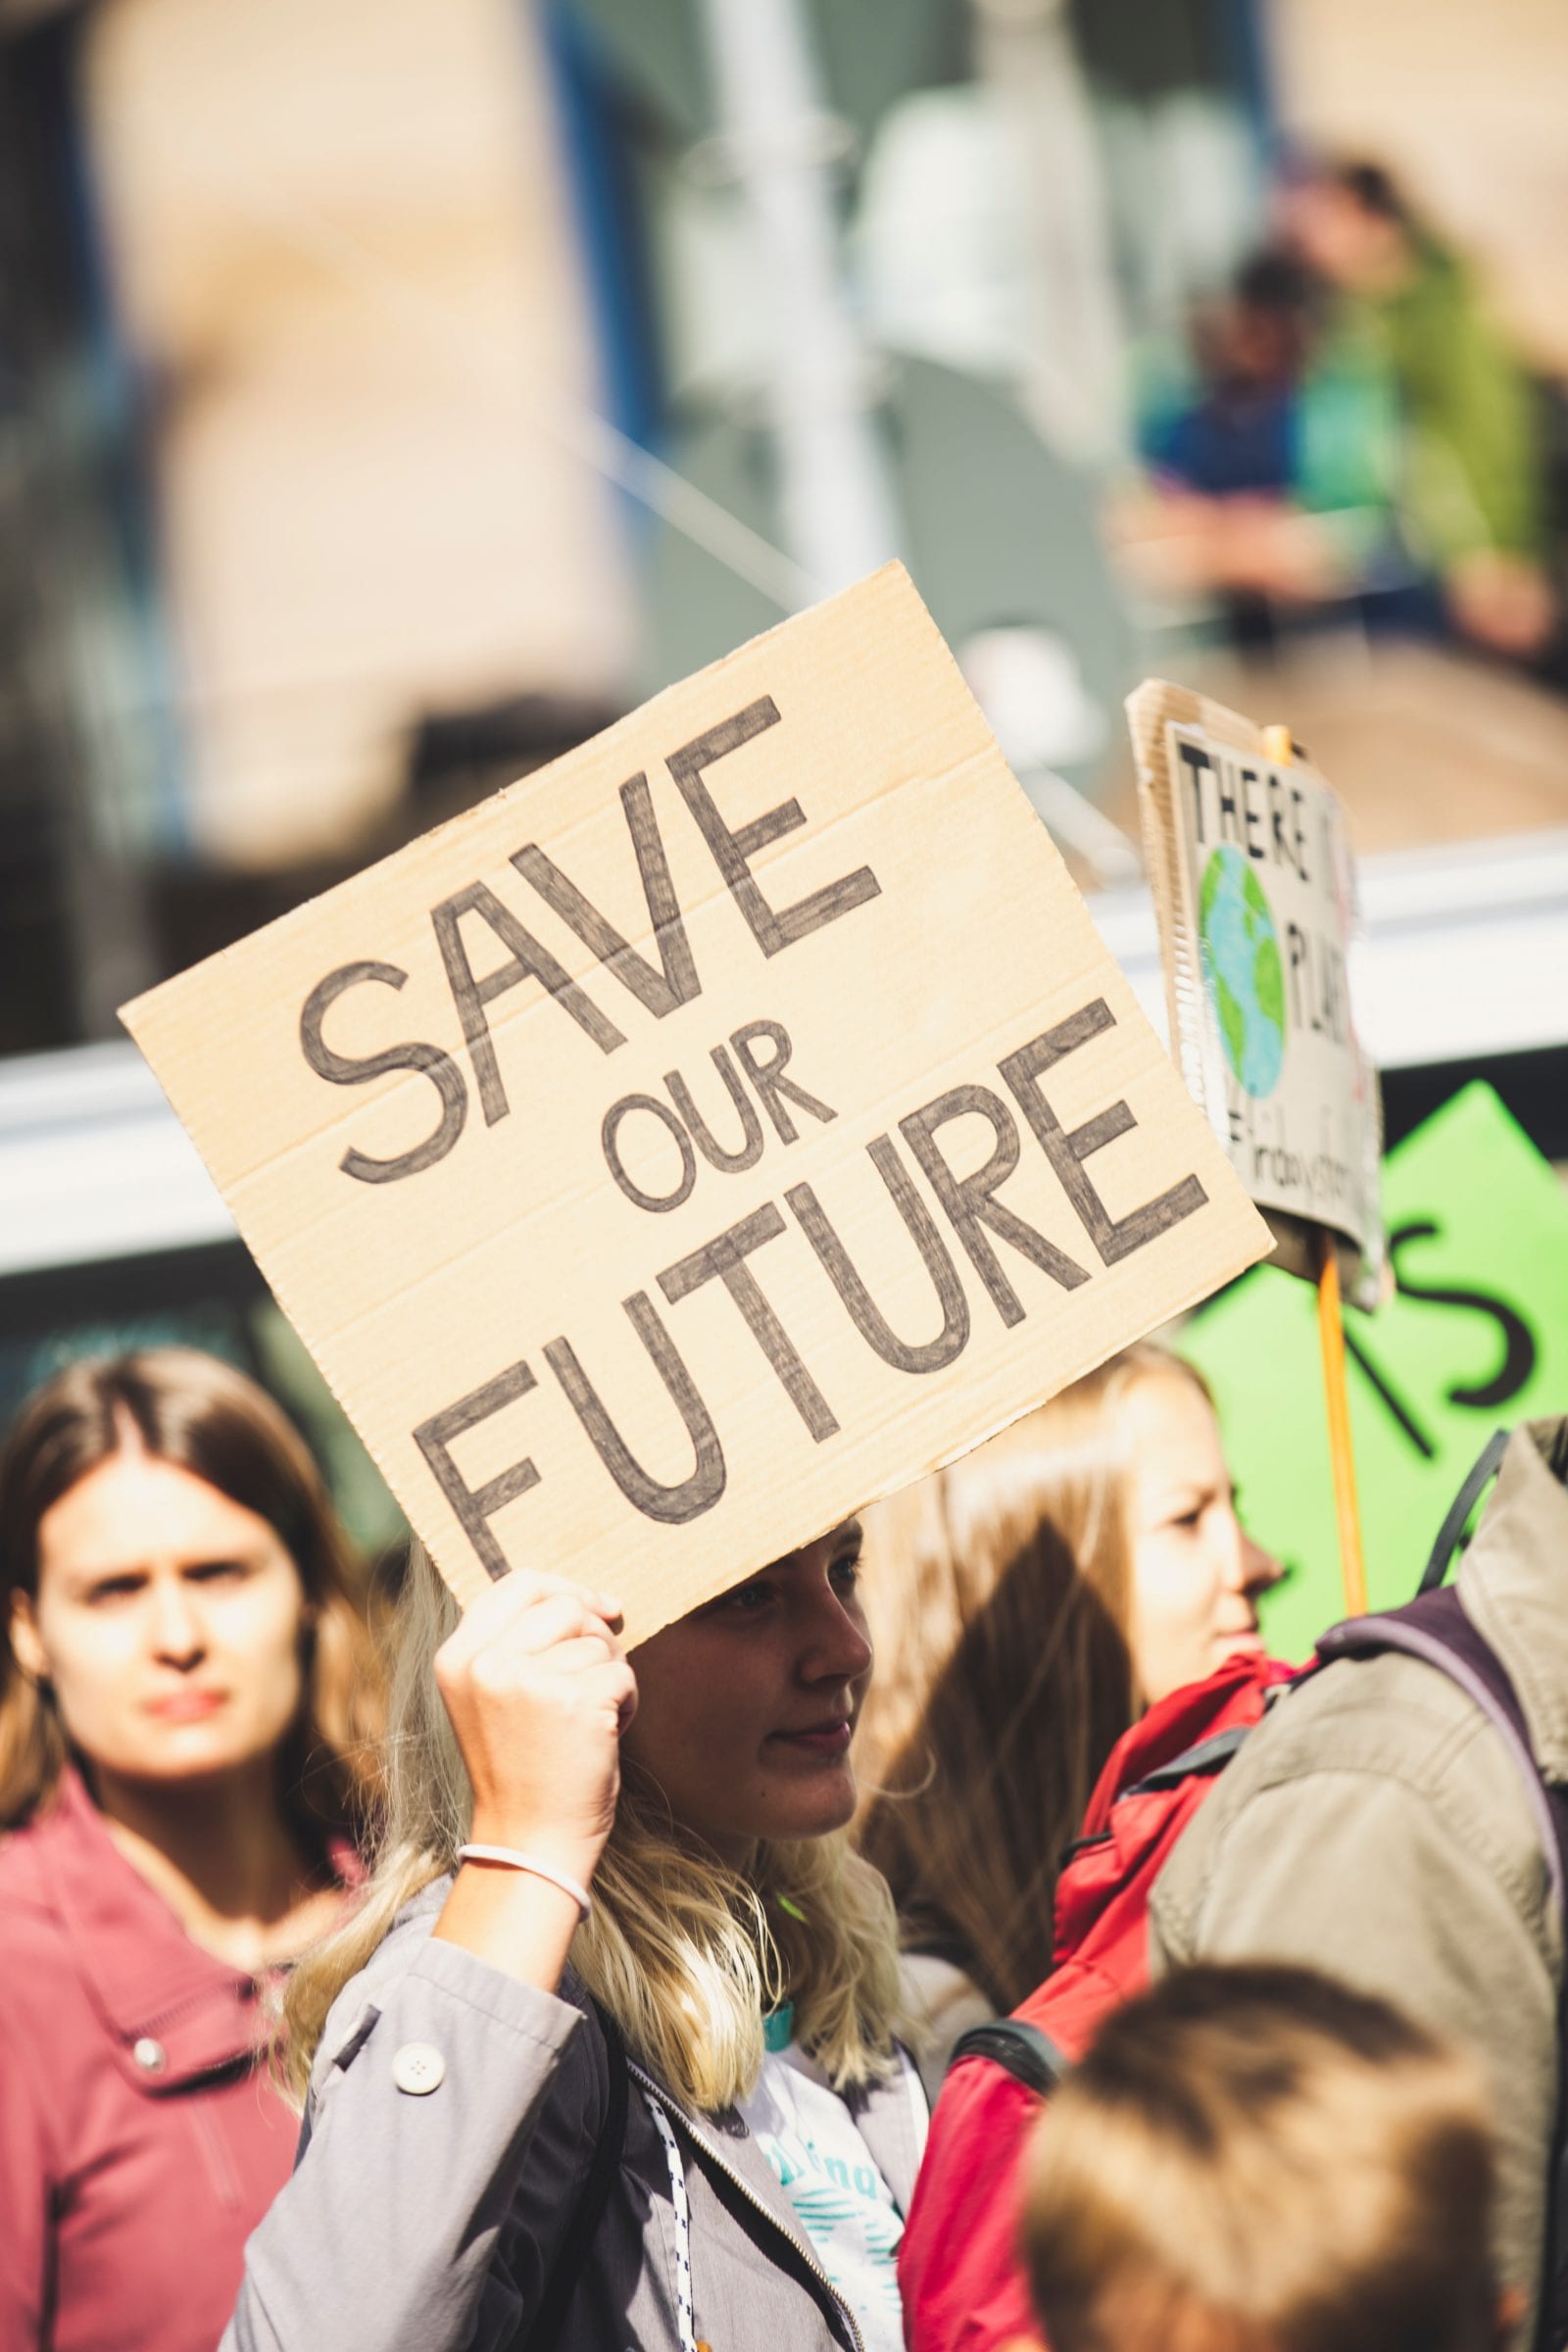 Protesters with sign "Save our future"